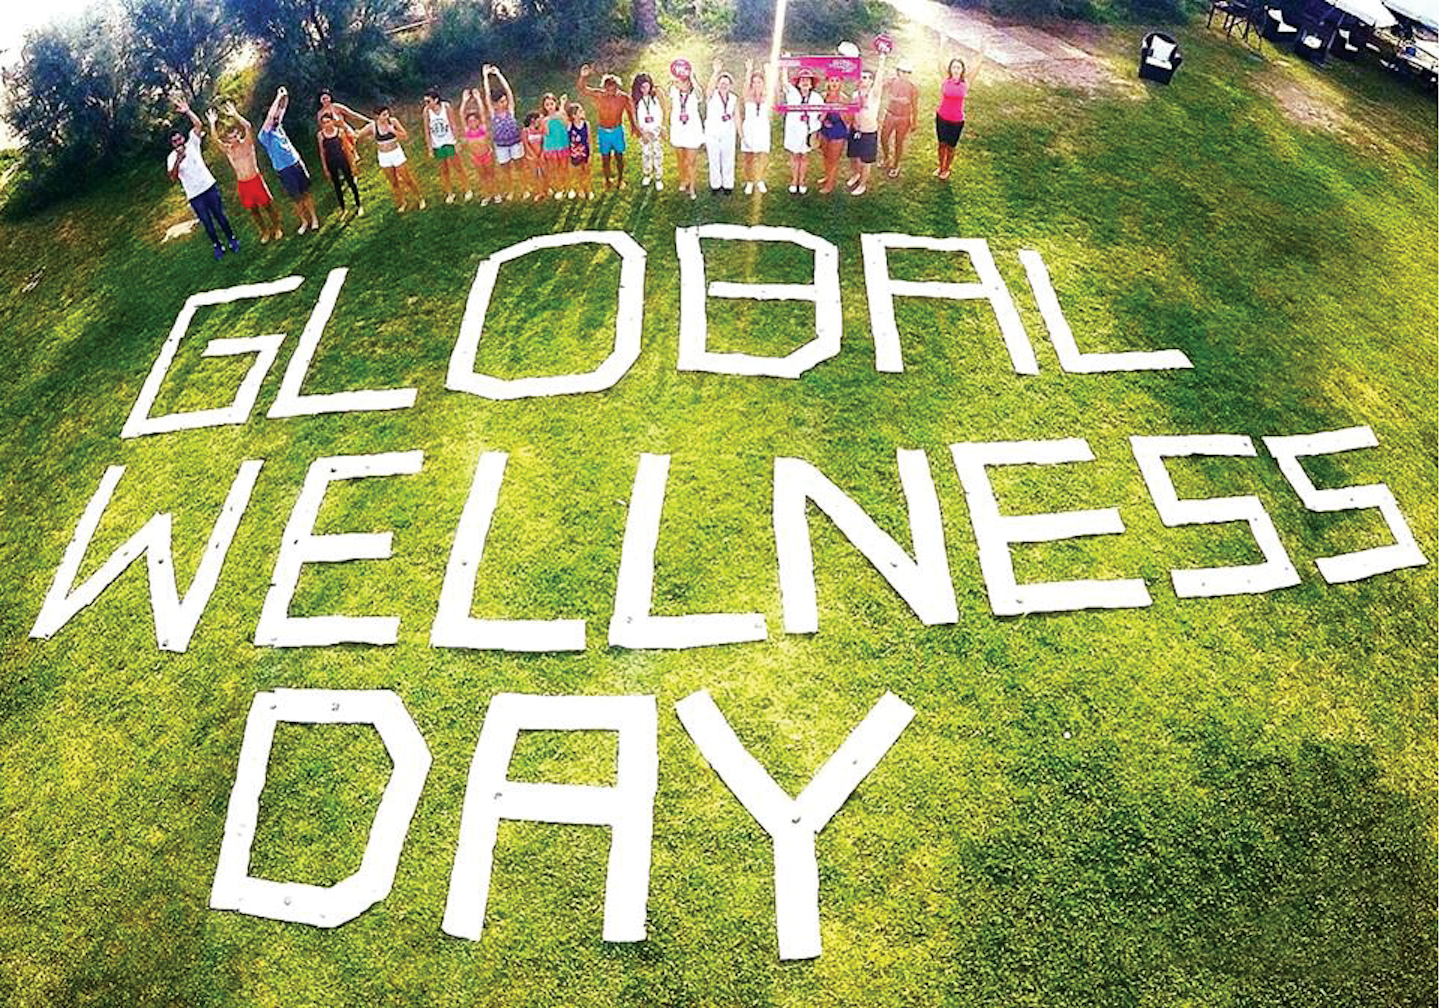 Global Wellness Day Encourages Living A Life of Balance & WellBeing